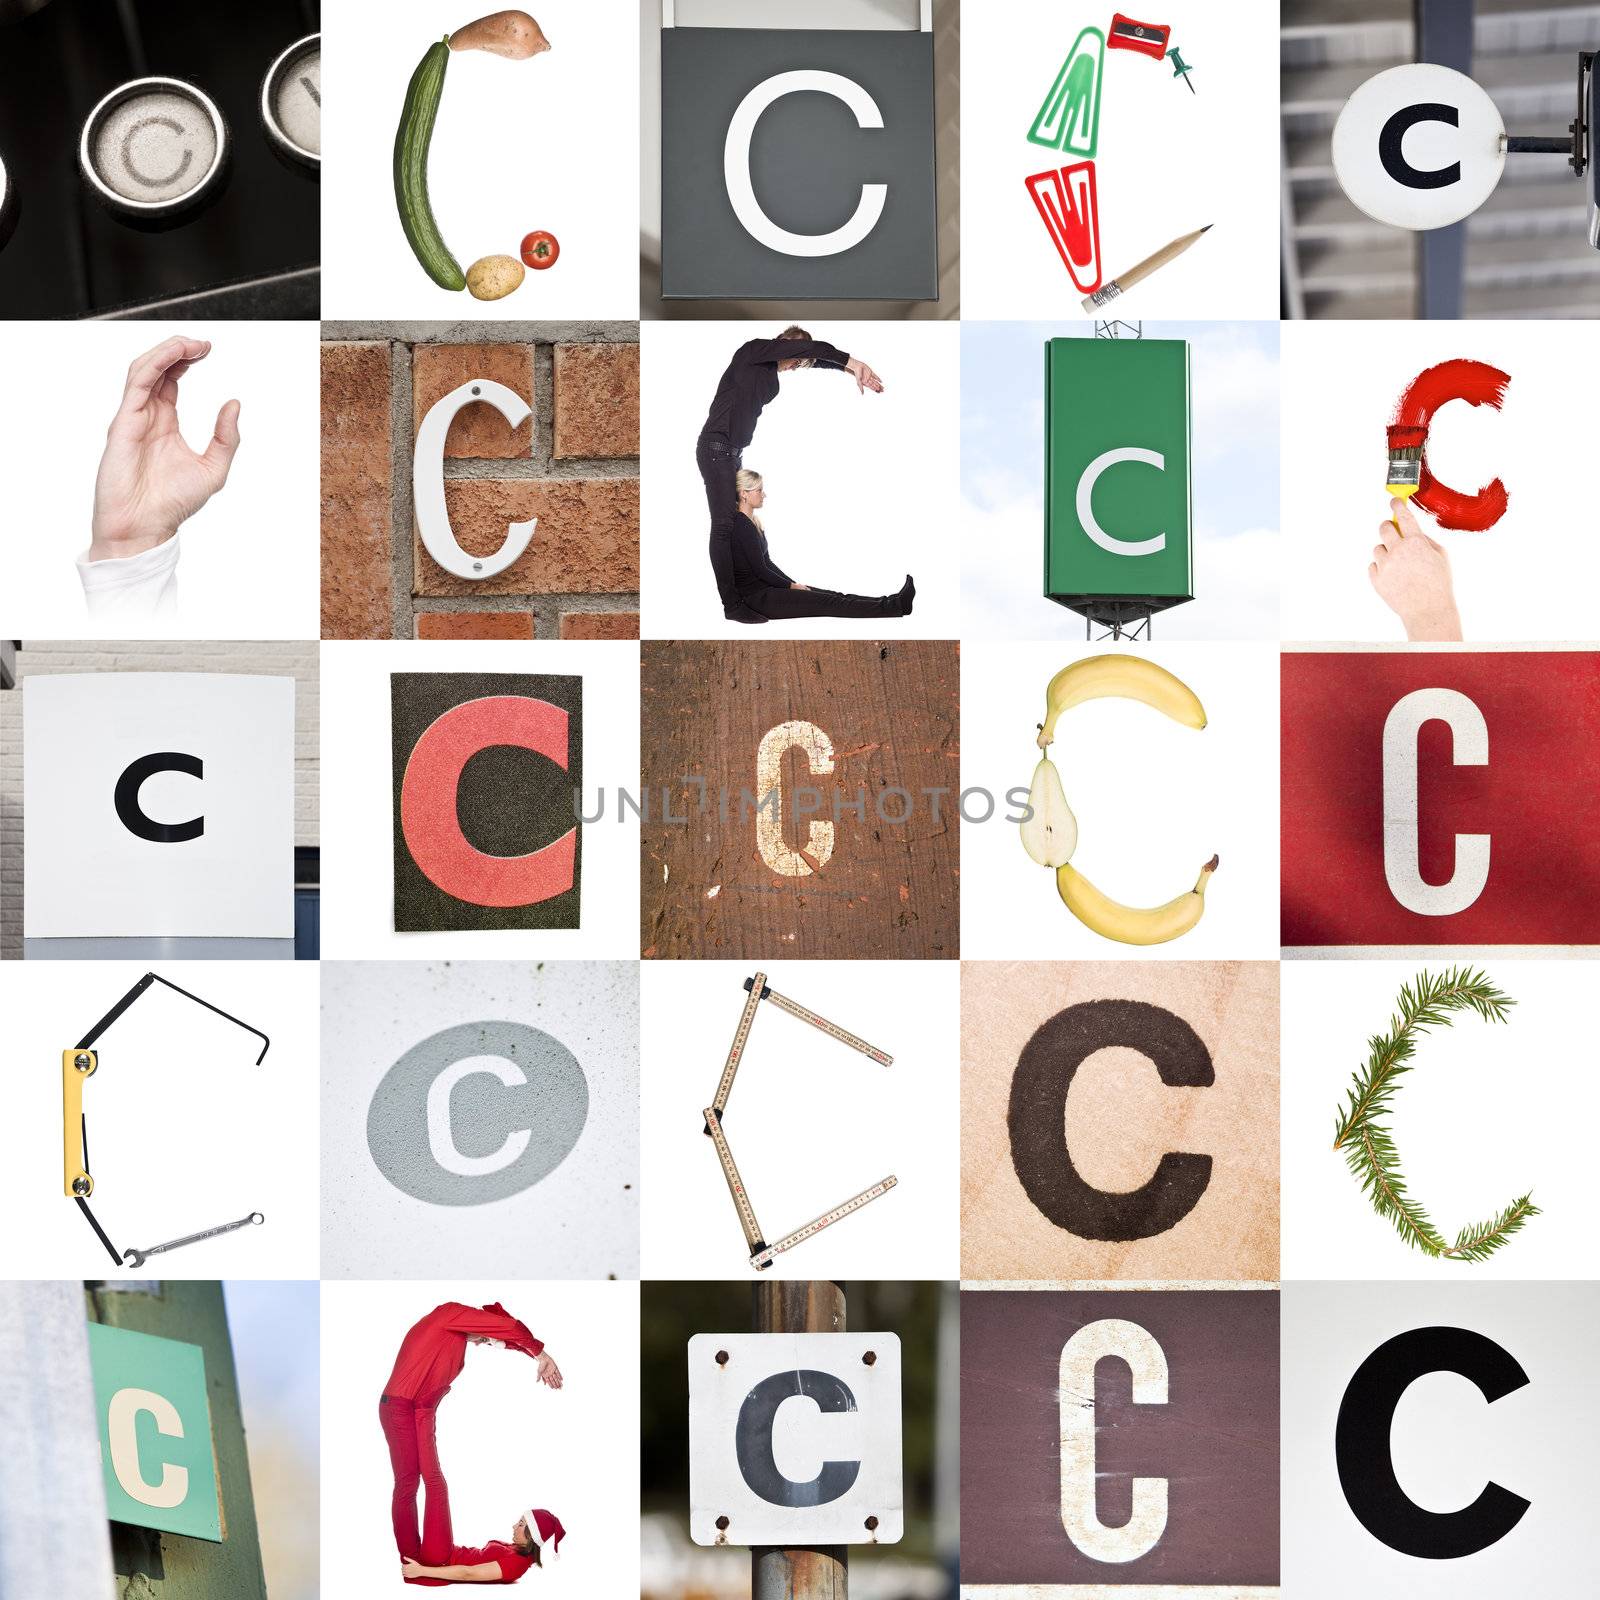 Collage with 25 images with letter C